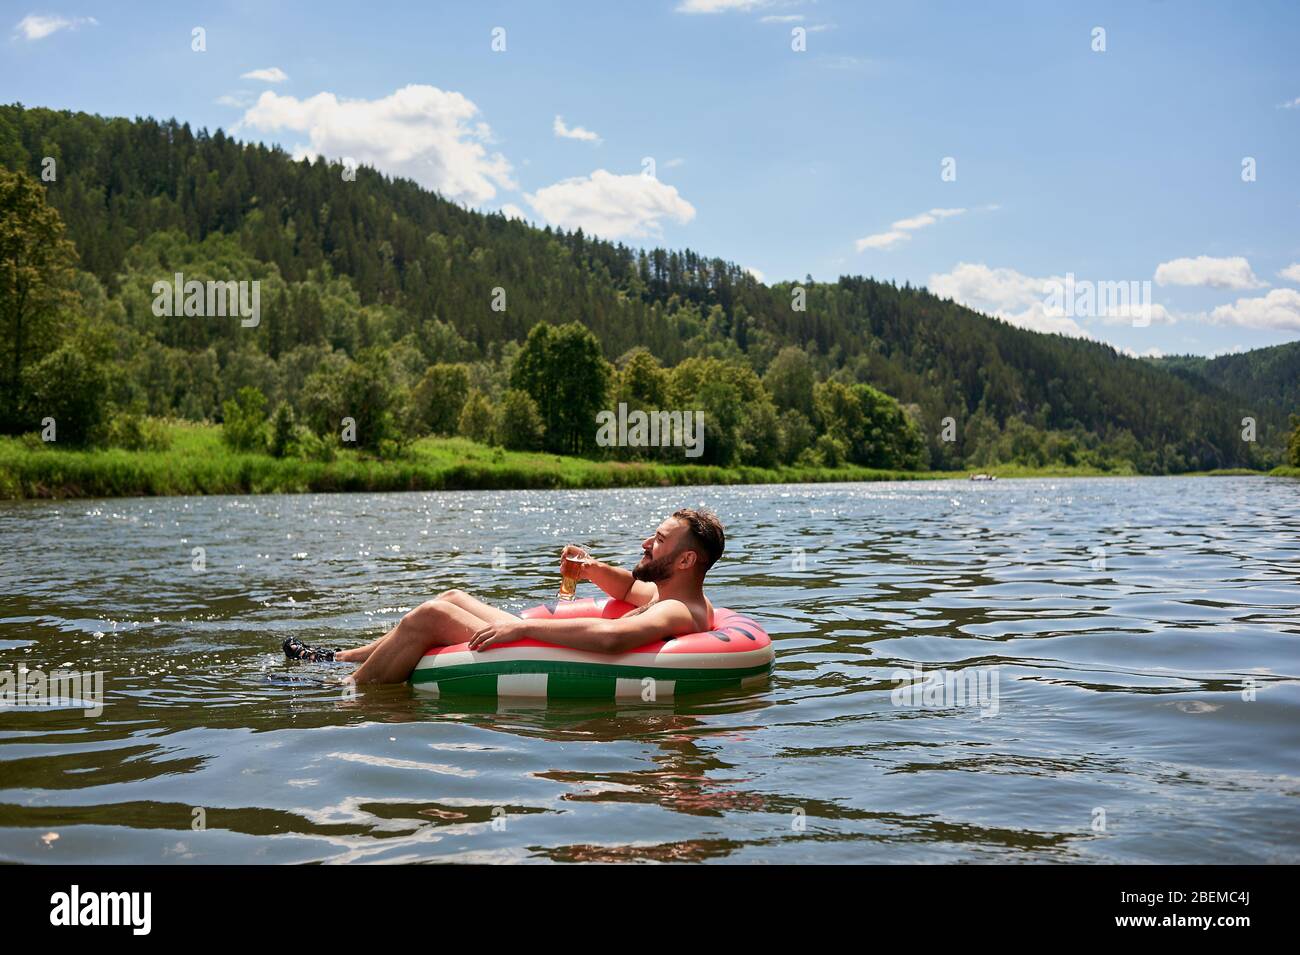 Enjoying life. Young man resting with a glass of beer on the river. Relaxation, vacations, lifestyle concept Stock Photo